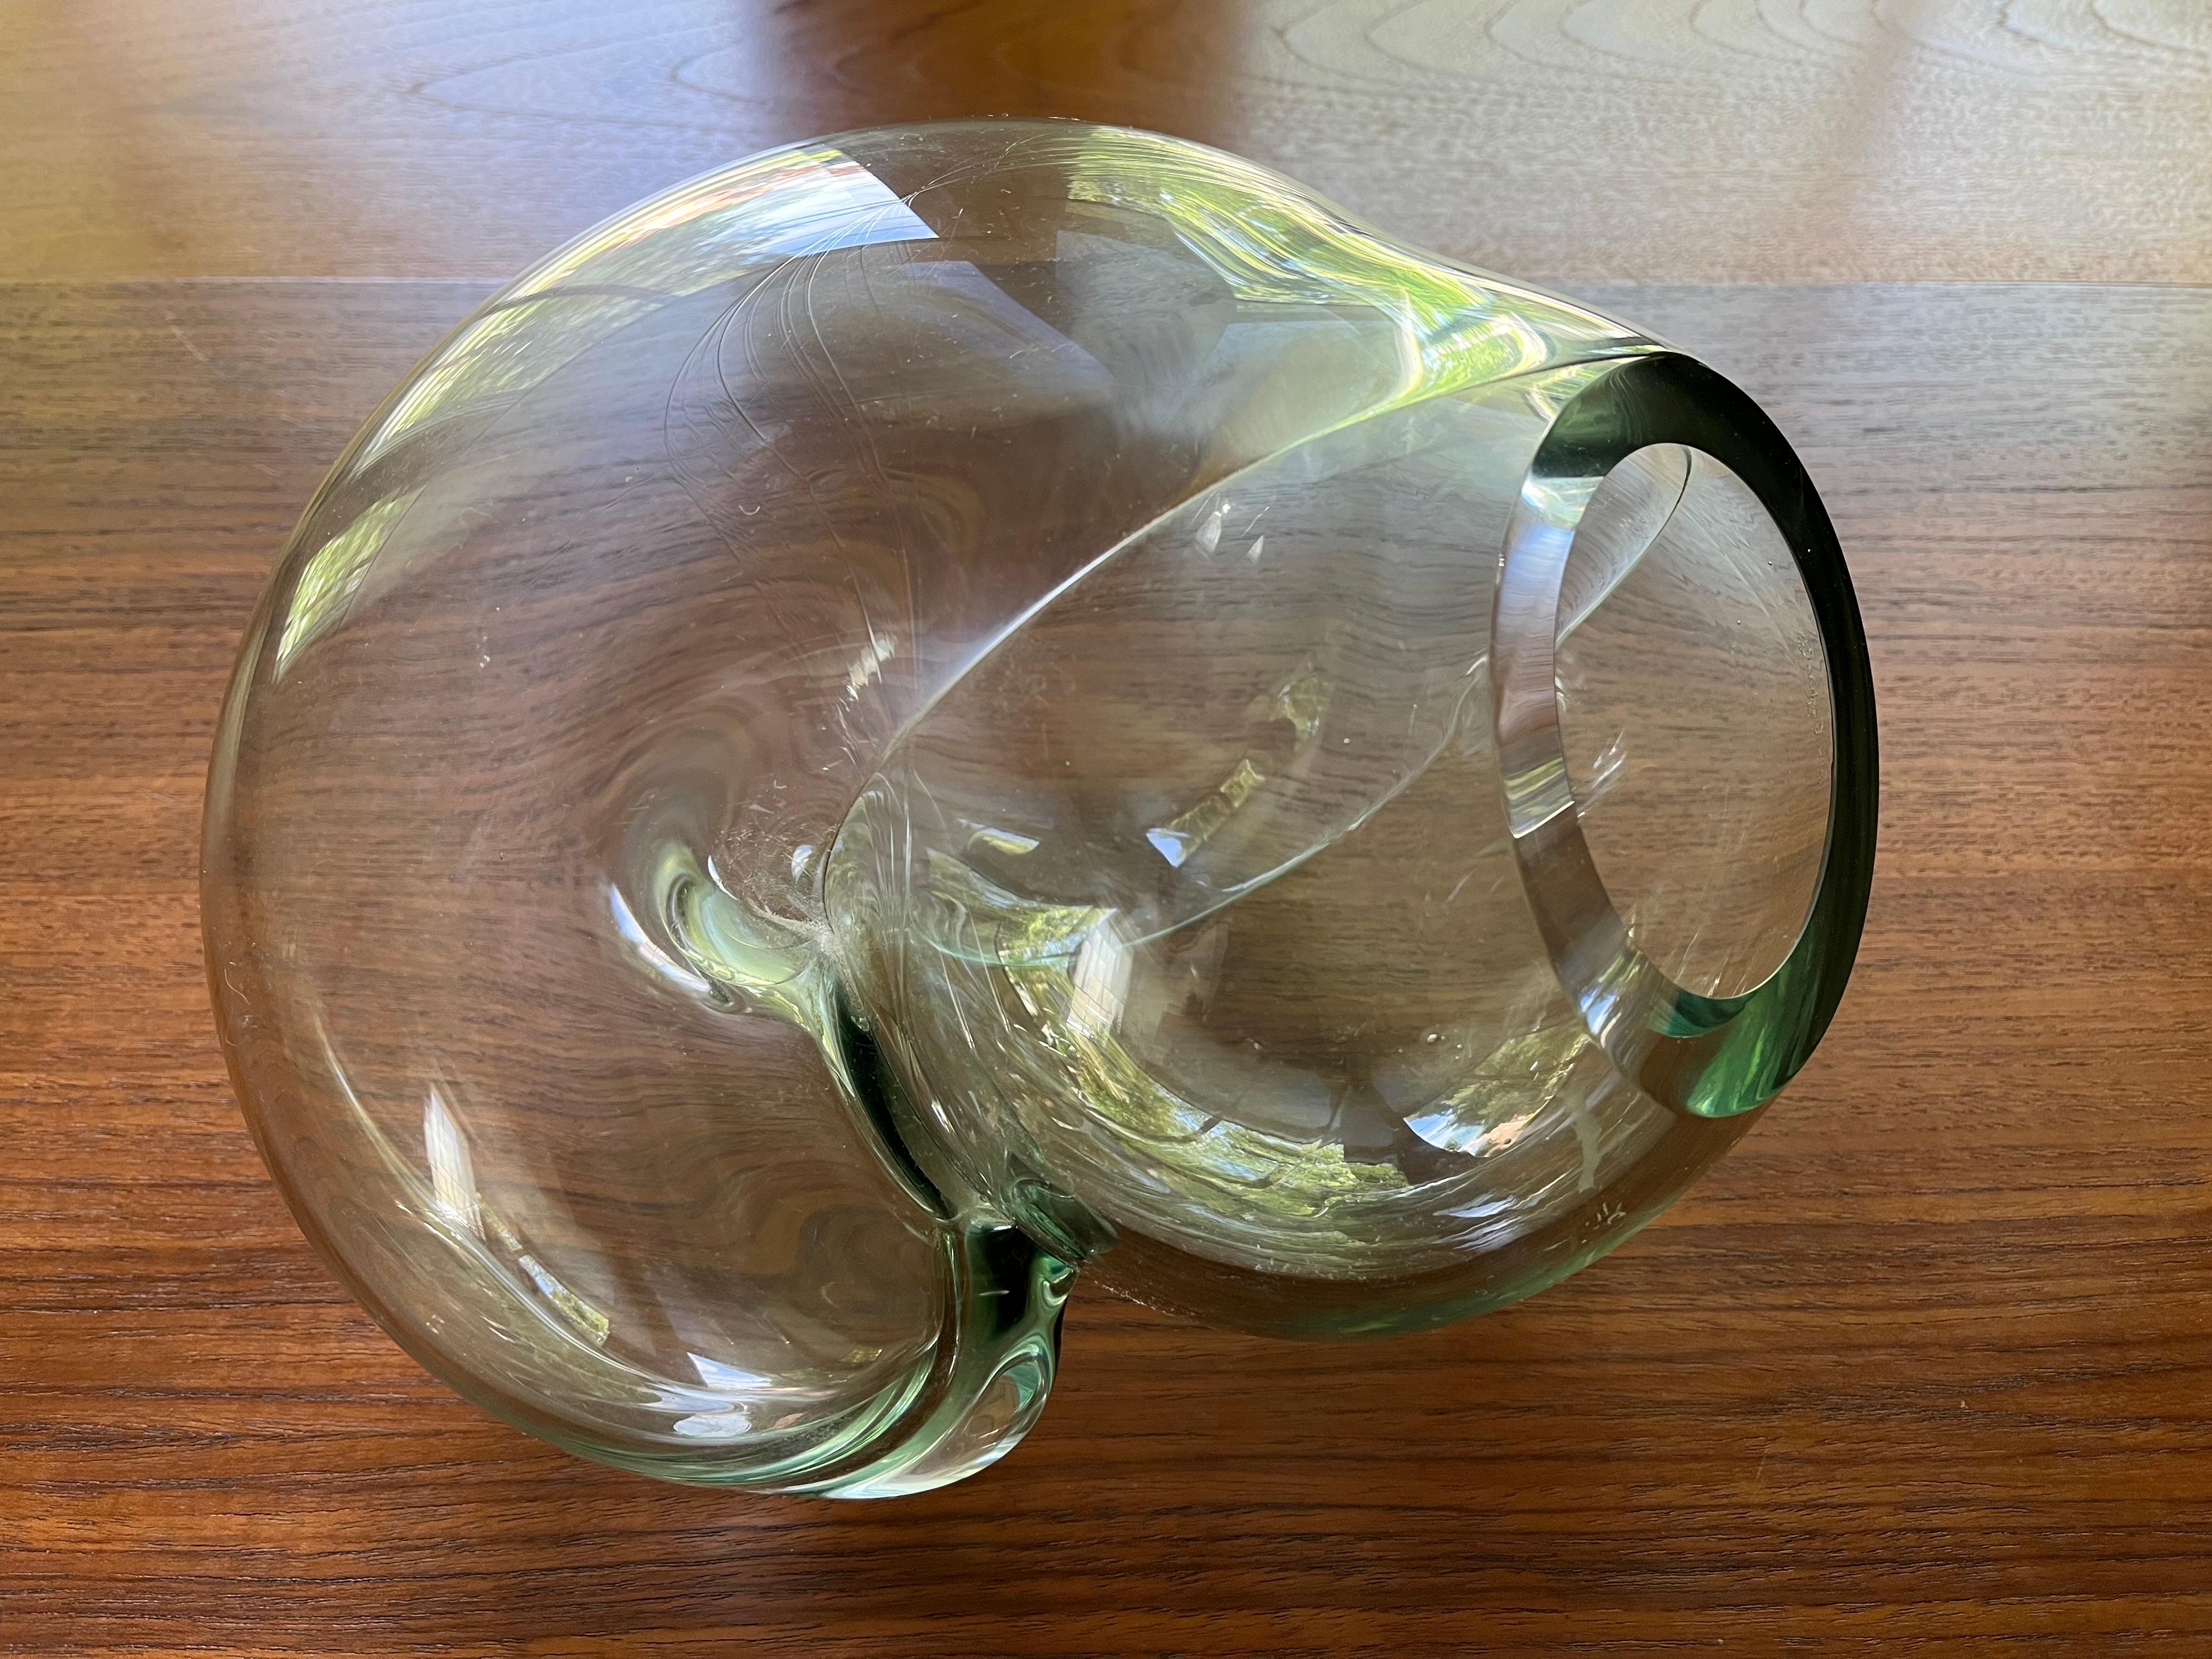 Large clear art glass orb / vessel sculpture by New Mexico Artist John Bingham. 

This hand blown glass sculpture has a Biomorphic free form design and is in very good condition. Approximate size is 10